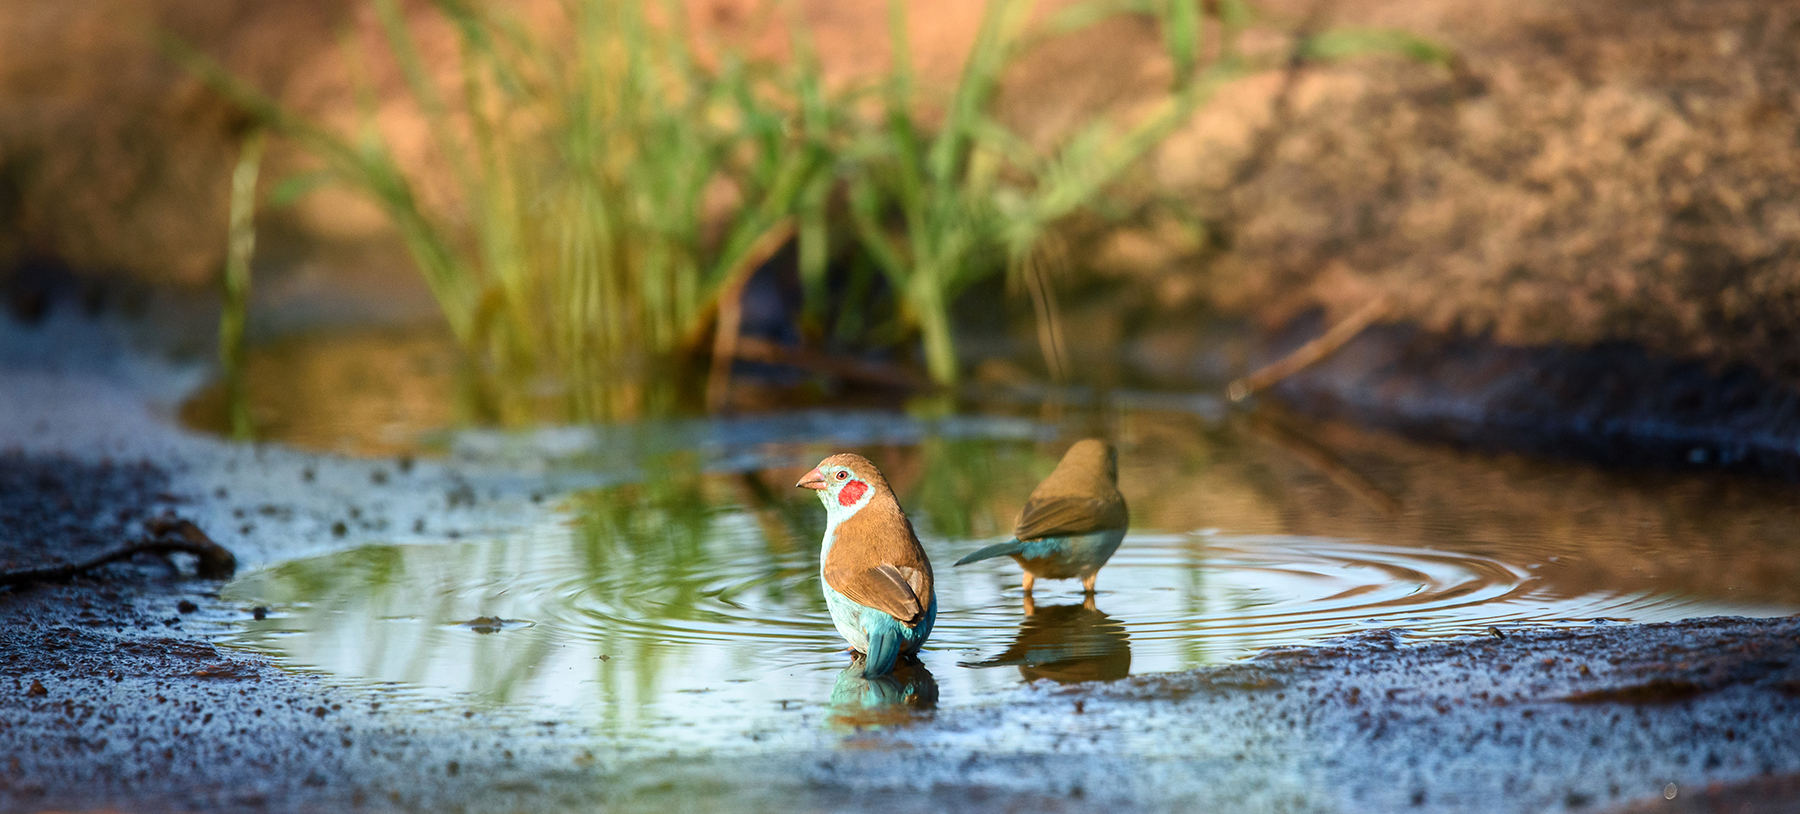 Two little red-cheeked birds bathing in a puddle like little guys